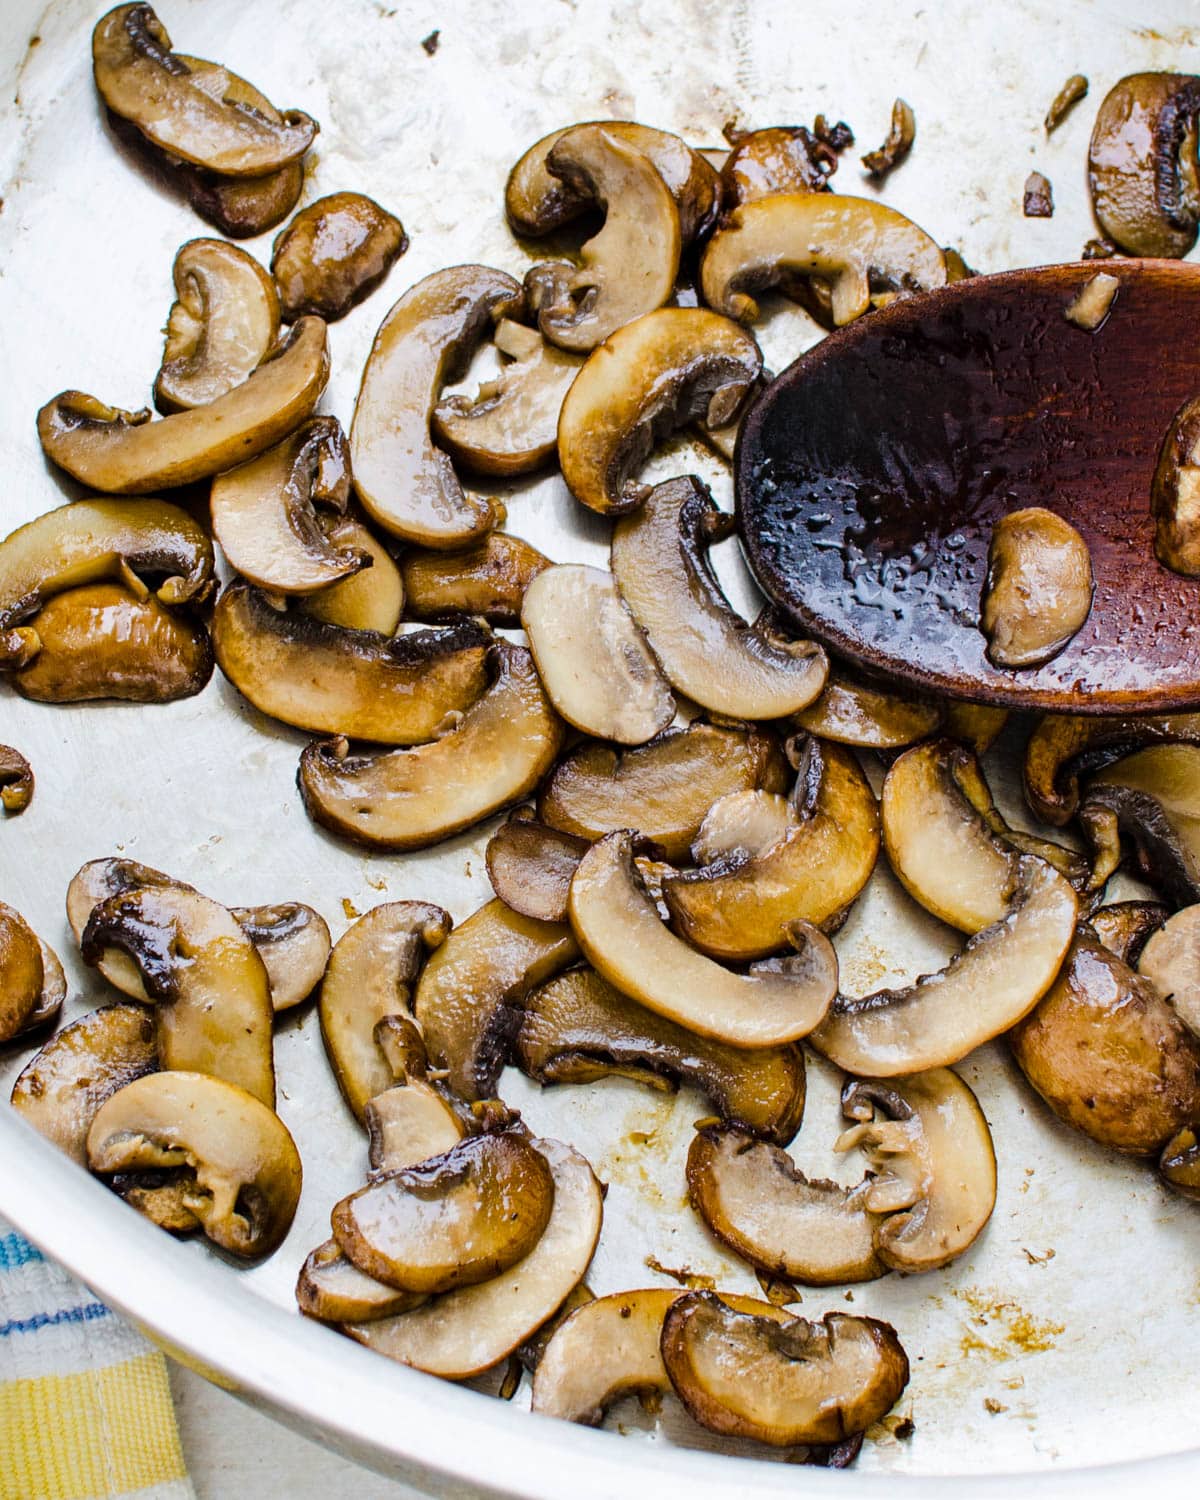 I was browning mushrooms in a skillet.